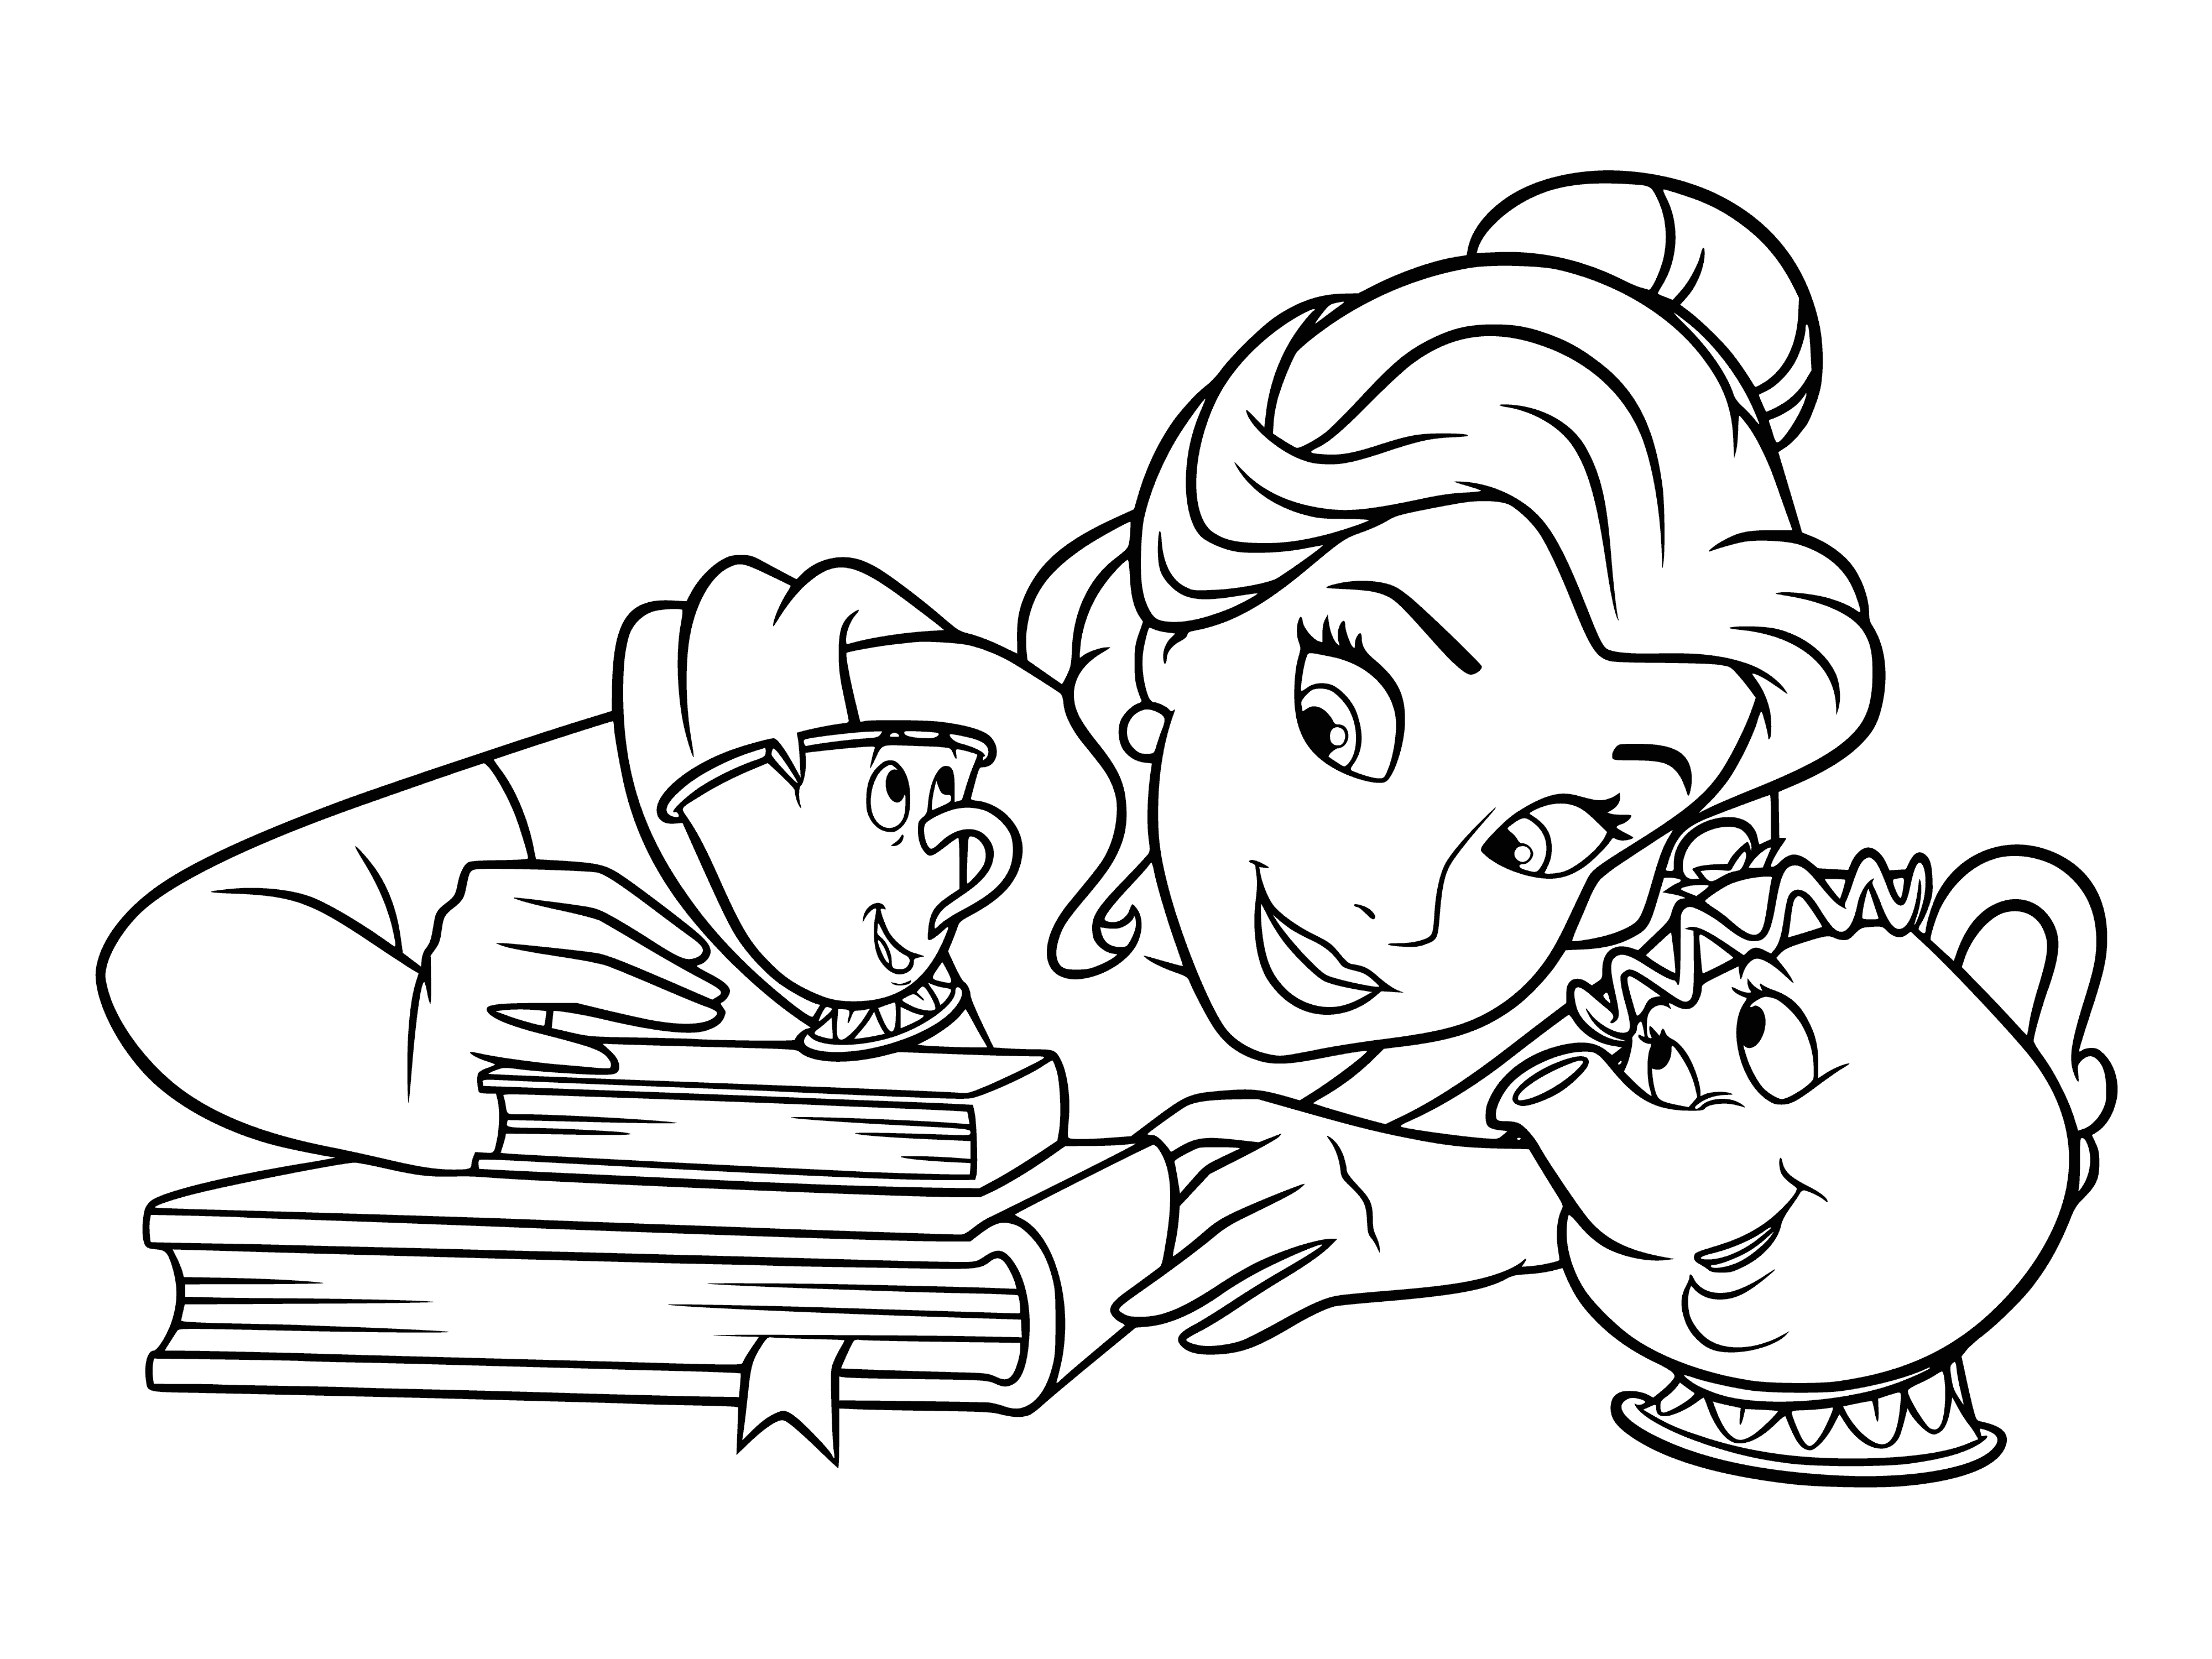 Belle, Chip and Mrs Potts coloring page